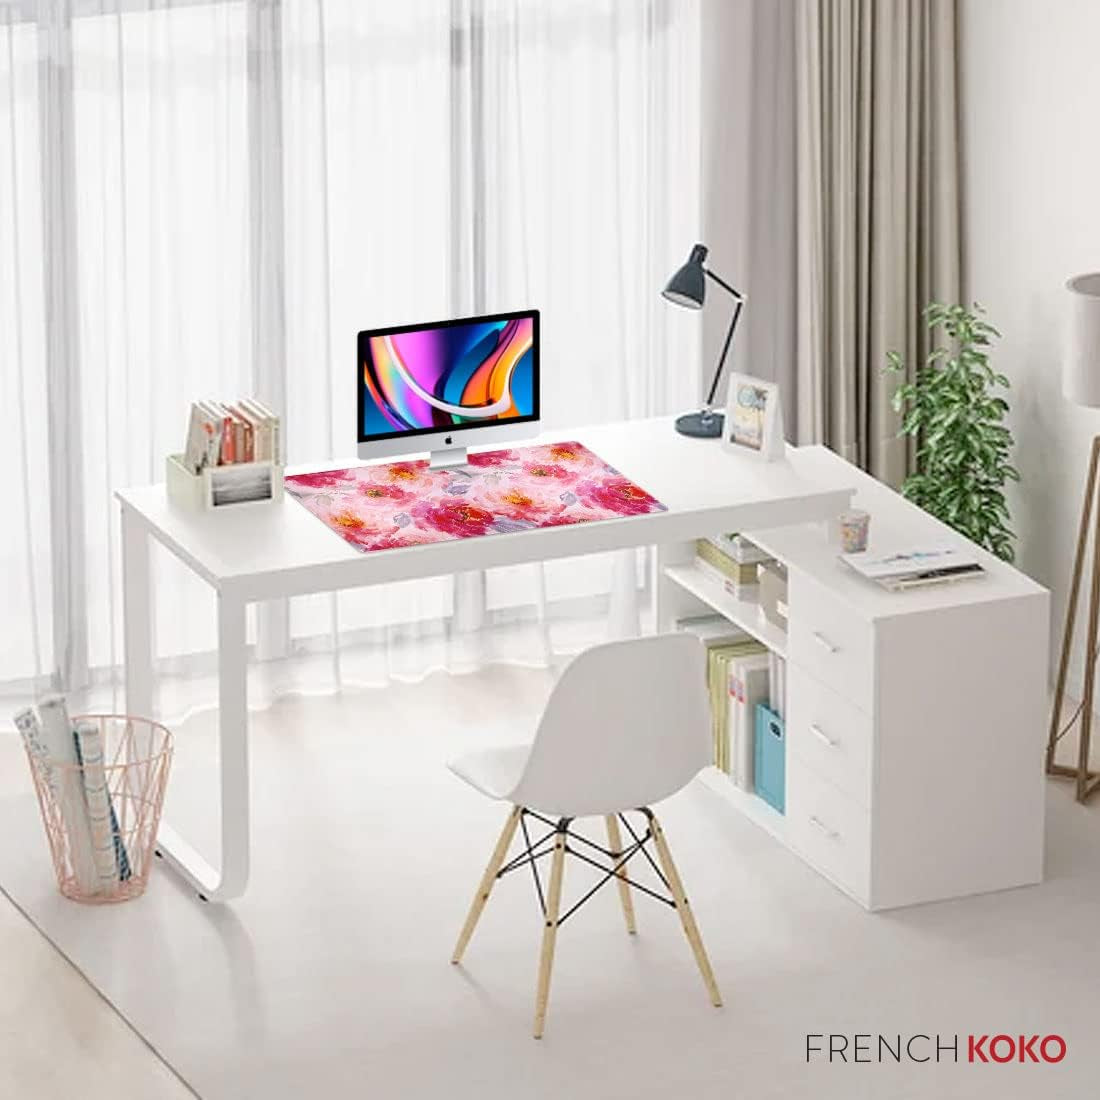 French KOKO Large Mouse Pad Big Desk Mat Extended Desk Pad Keyboard Gaming Mousepad Cute Office Decor Women Girls Computer Accessories College Essentials Work Home Office Supplies XL Pink Flowers